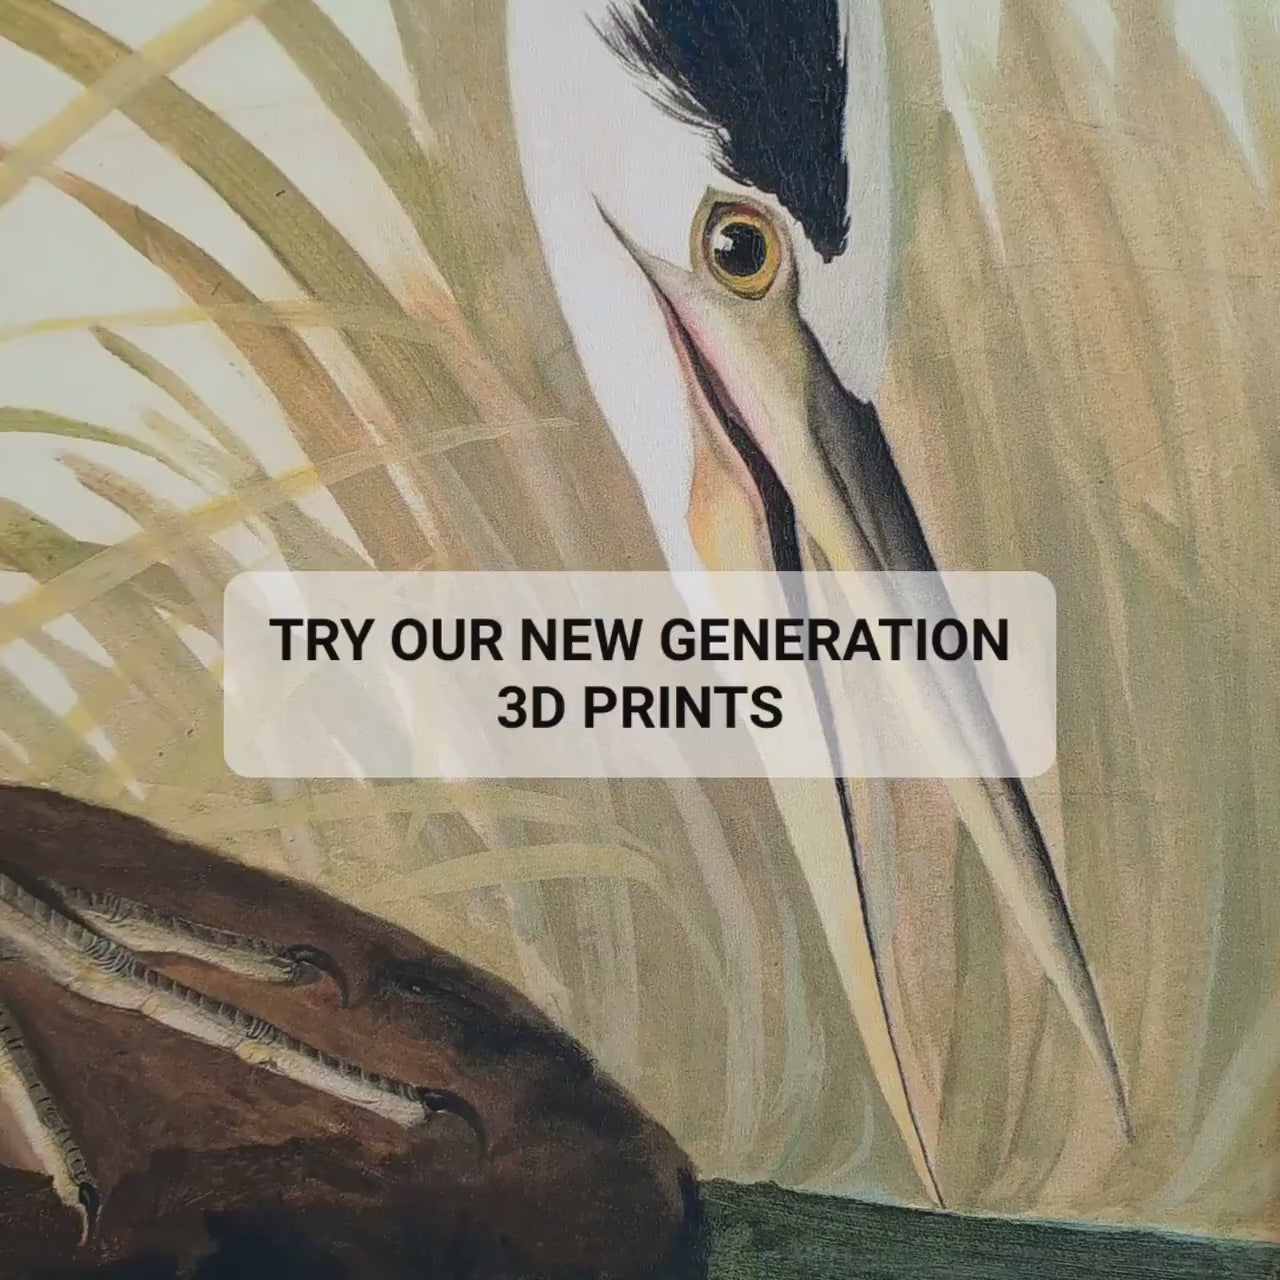 Great Blue Heron by John James Audubon, 3d Printed with texture and brush strokes looks like original oil-painting, code:104